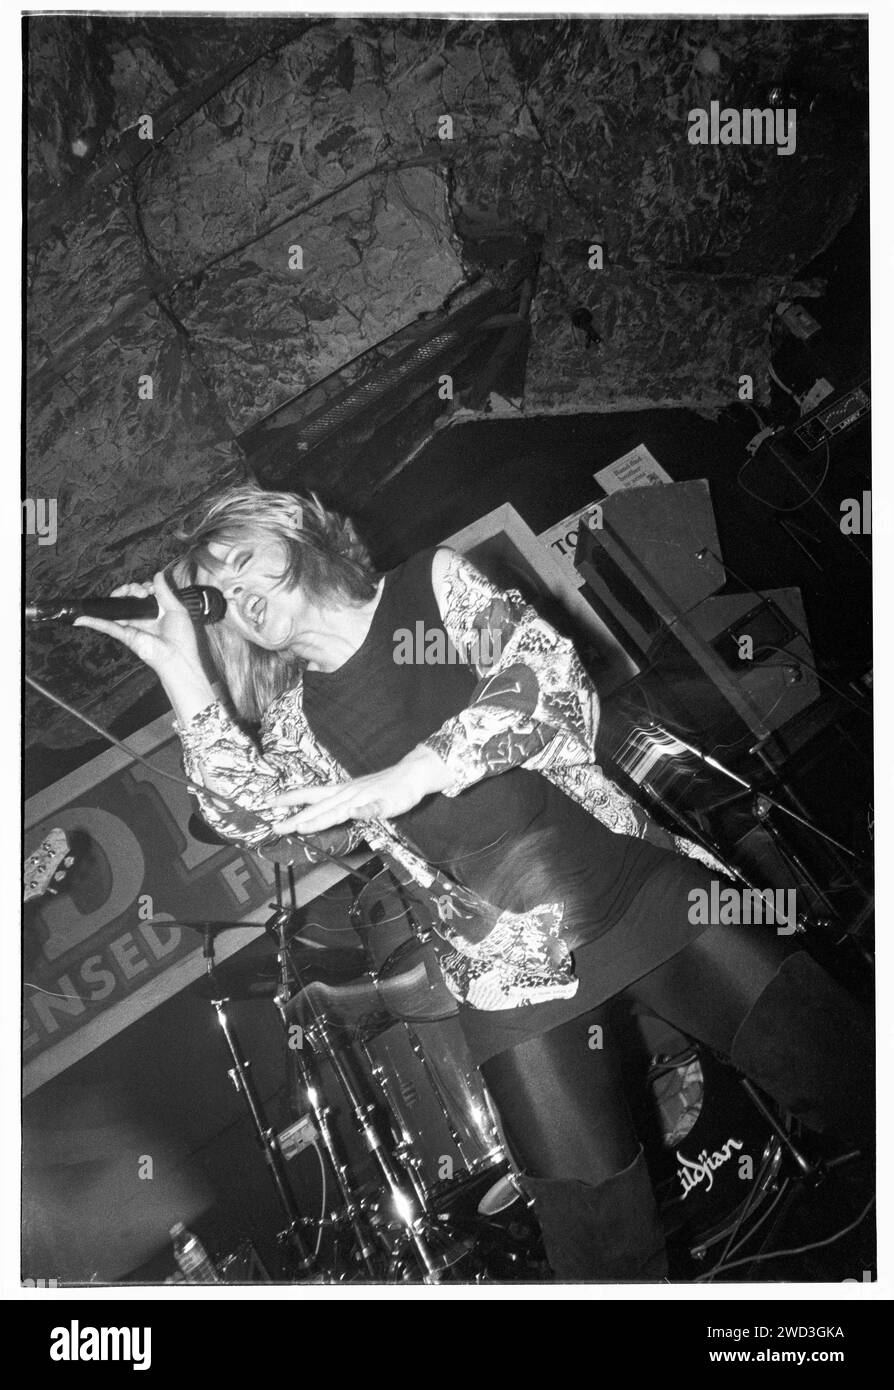 TOYAH, CONCERT, 1993: Punk icon Toyah Wilcox playing live at TJ’s in Newport, Wales, UK on 9 November 1993. Photo: Rob Watkins. INFO:  Toyah Willcox, known mononymously as Toyah, is a British singer, actress, and presenter. Rising to prominence in the late '70s and '80s, her vibrant stage presence and diverse career span pop music, film, and theatre, establishing her as a multifaceted and iconic entertainer. Stock Photo